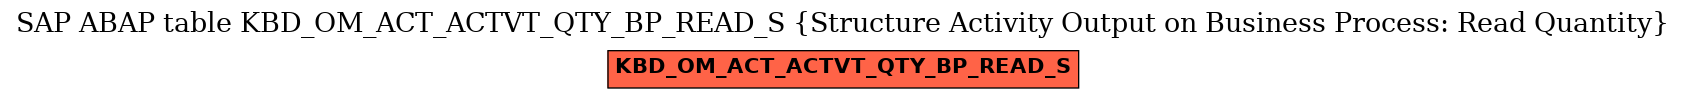 E-R Diagram for table KBD_OM_ACT_ACTVT_QTY_BP_READ_S (Structure Activity Output on Business Process: Read Quantity)